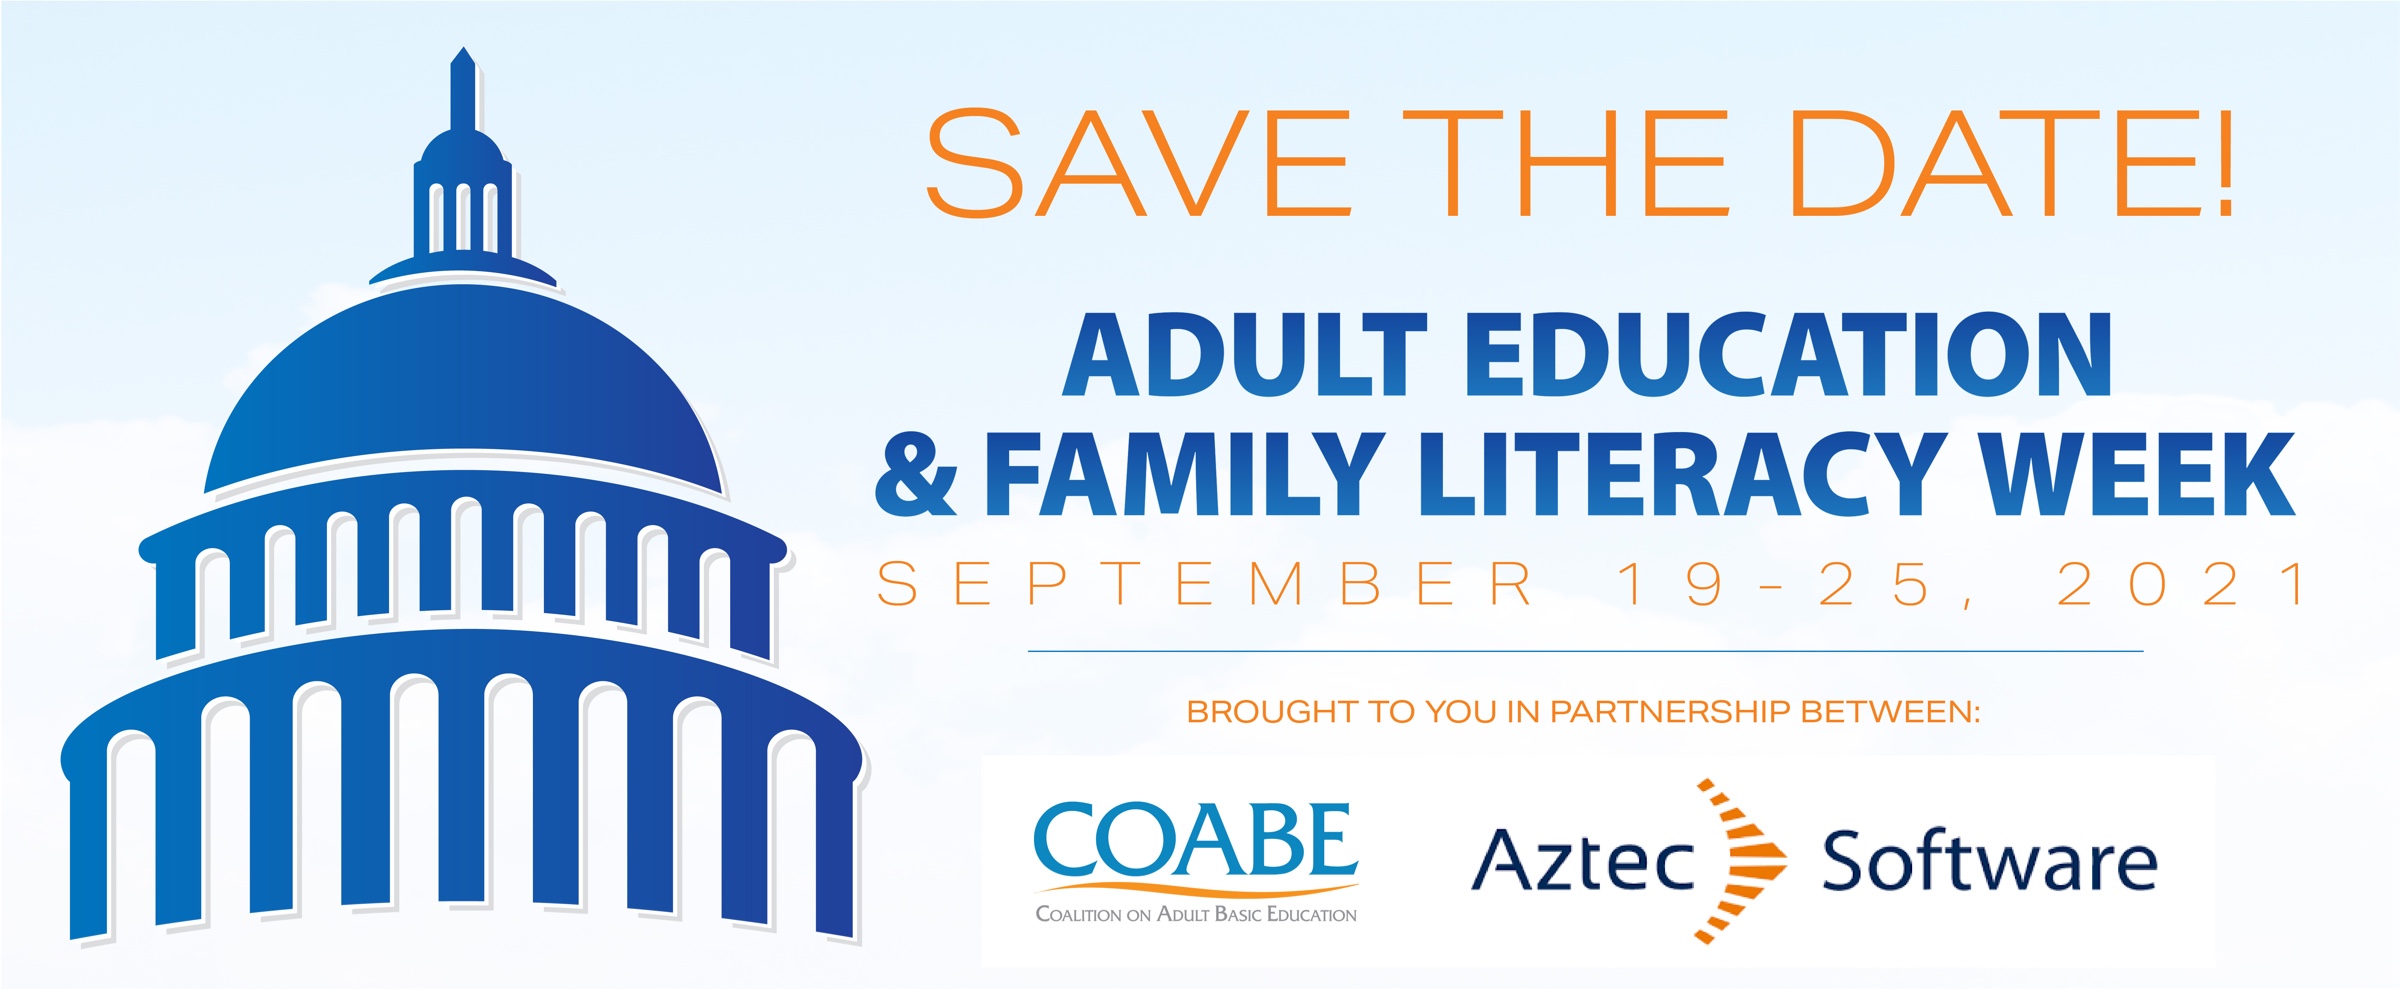 National Adult Education and Family Literacy Week Coalition on Adult